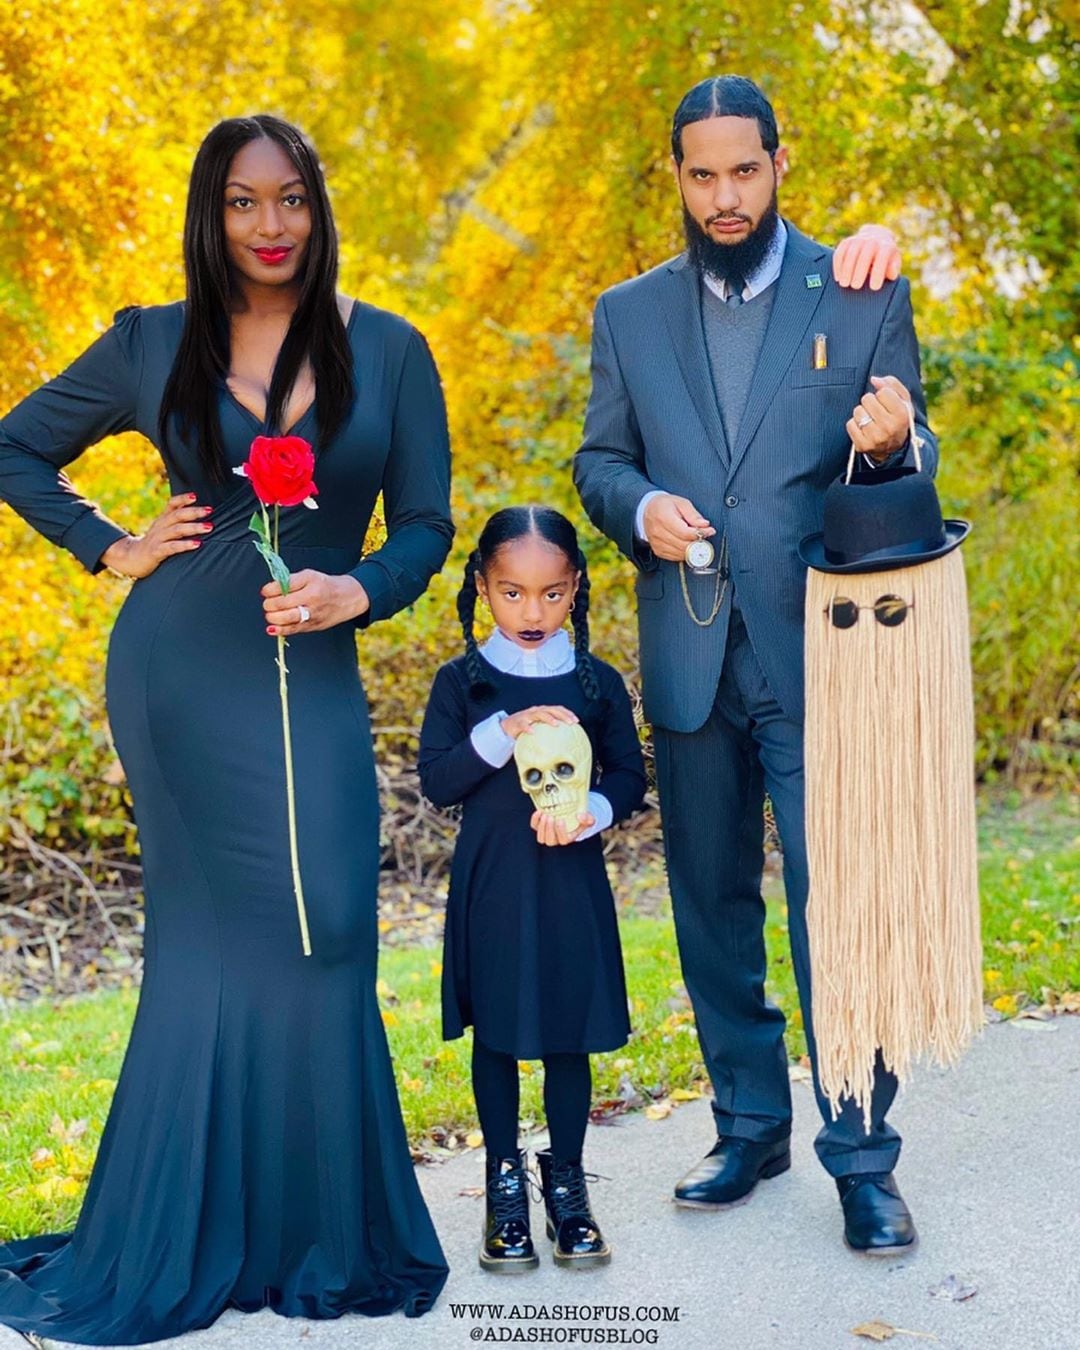 10 Family Halloween Costume Ideas That Are on Sale Now at